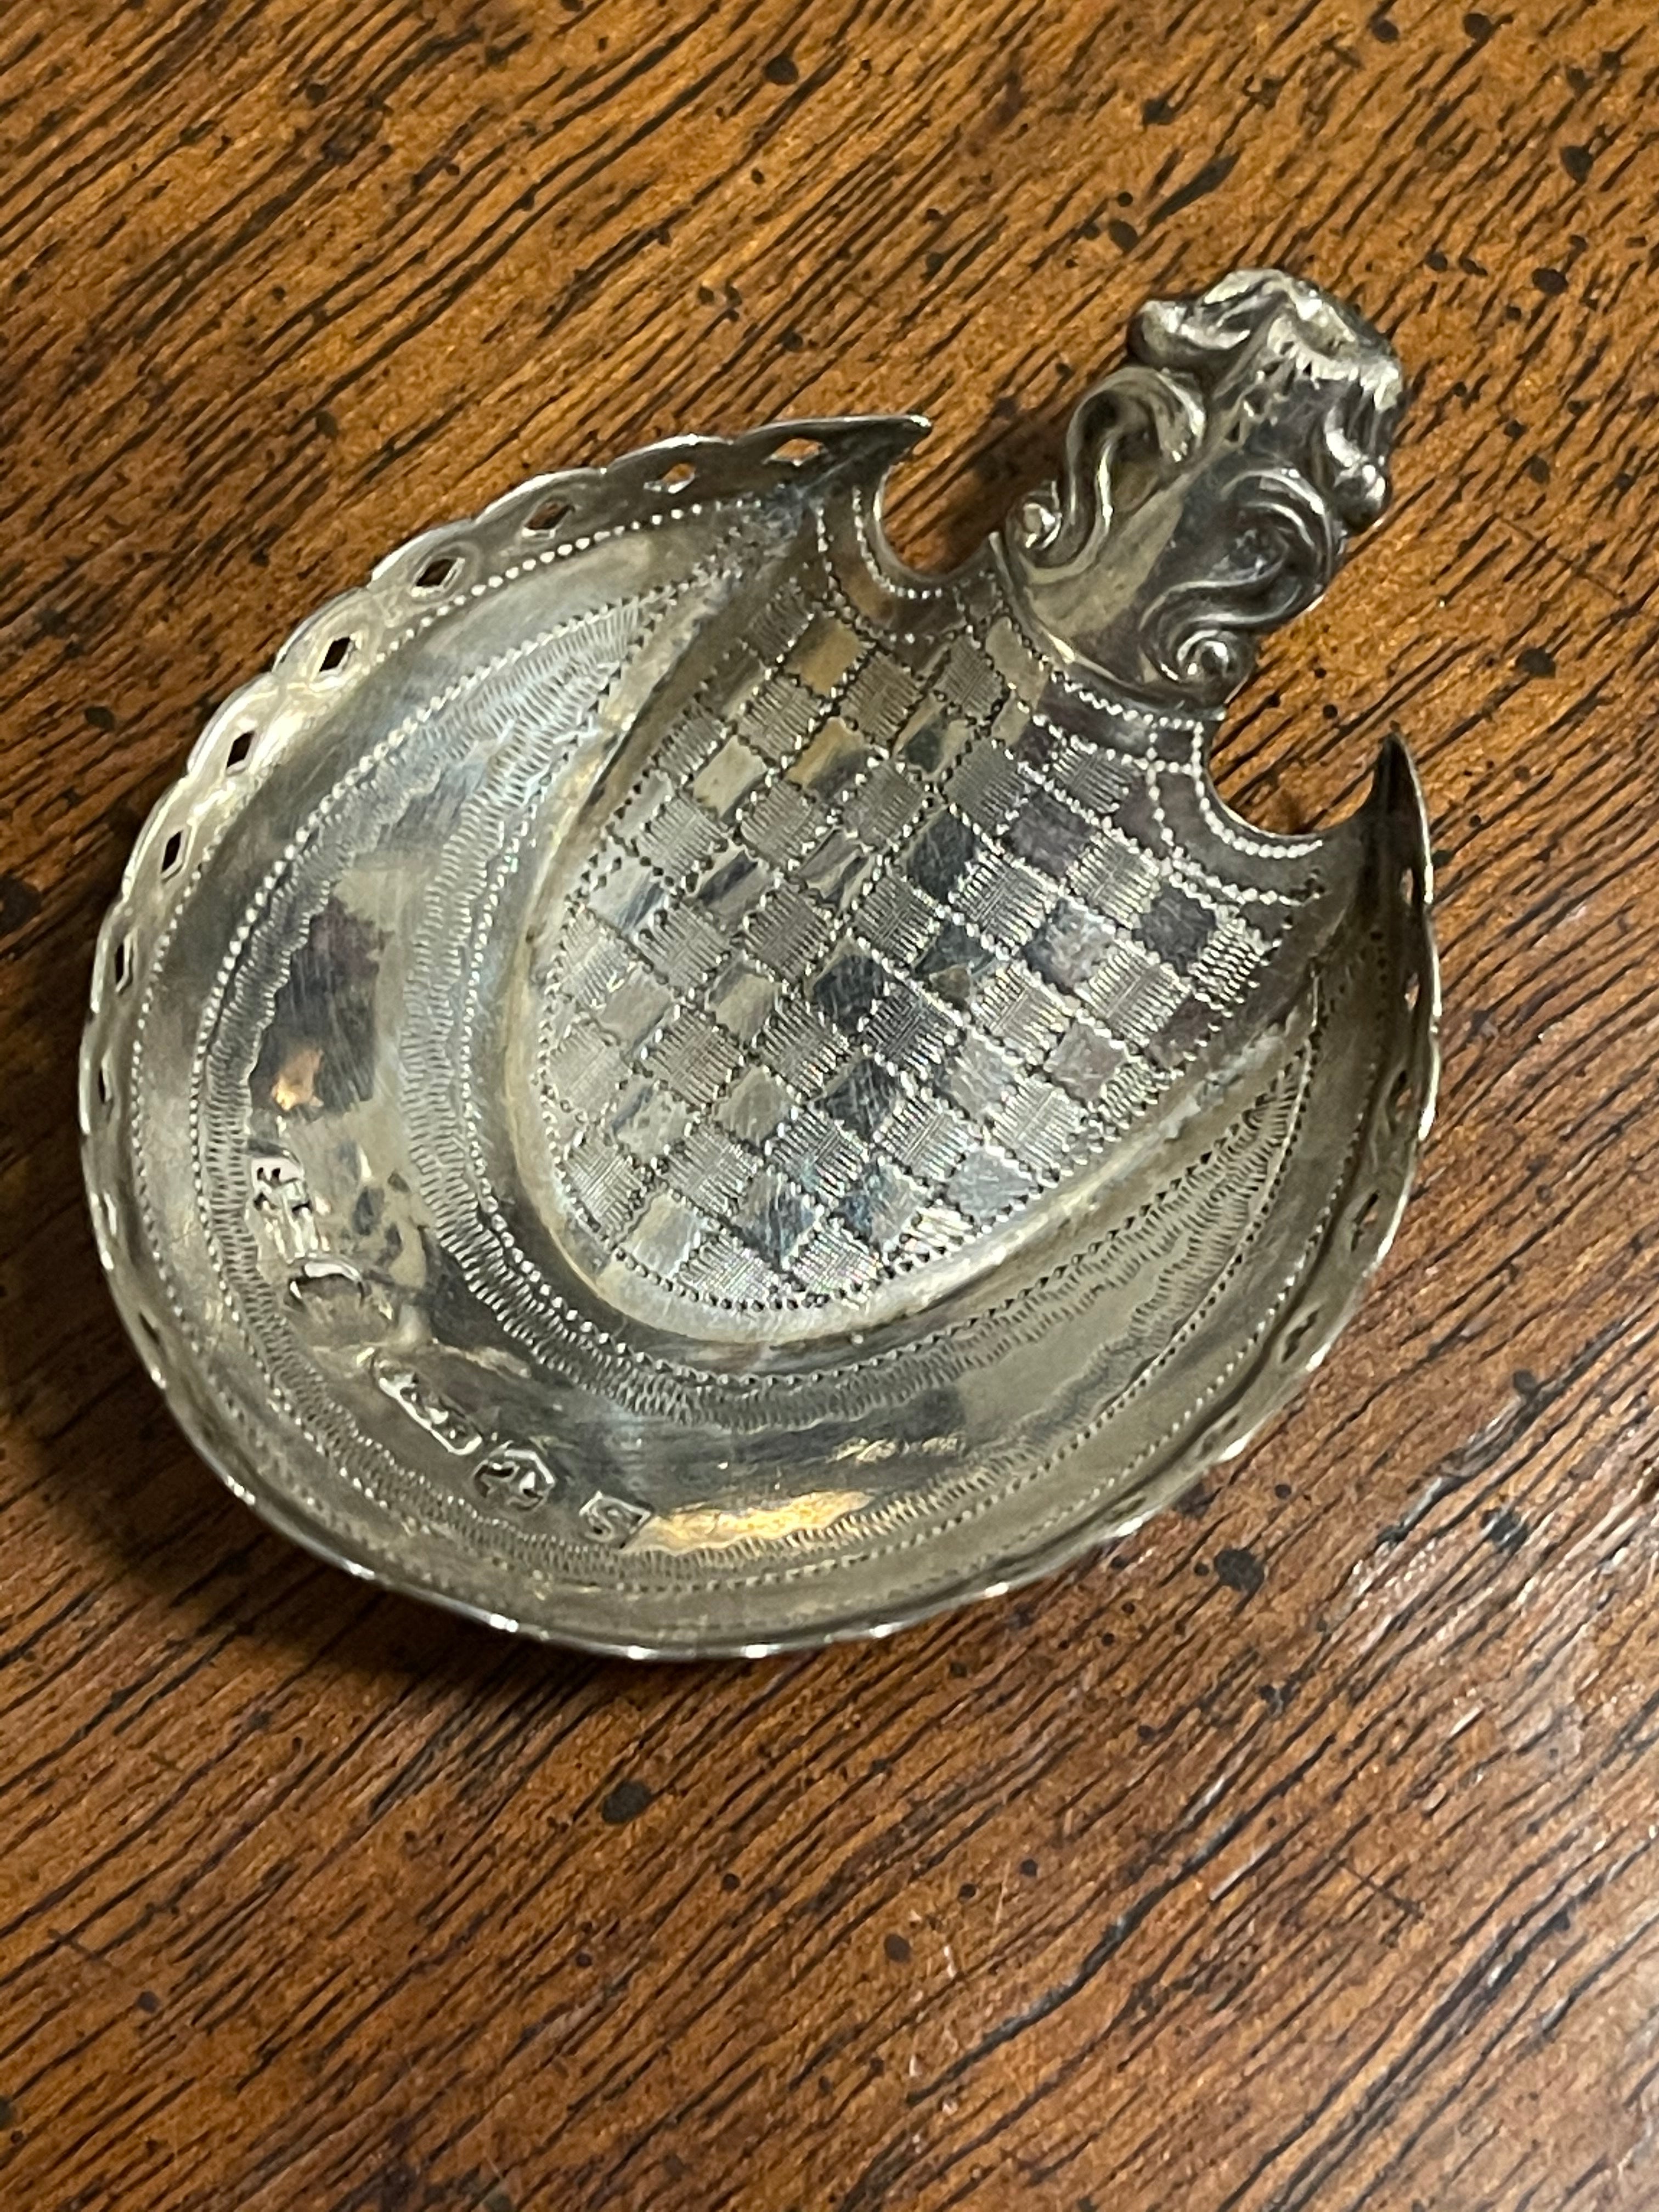 SOLD Unique George III Sterling Silver Caddy Spoon by Cocks & Bettridge.